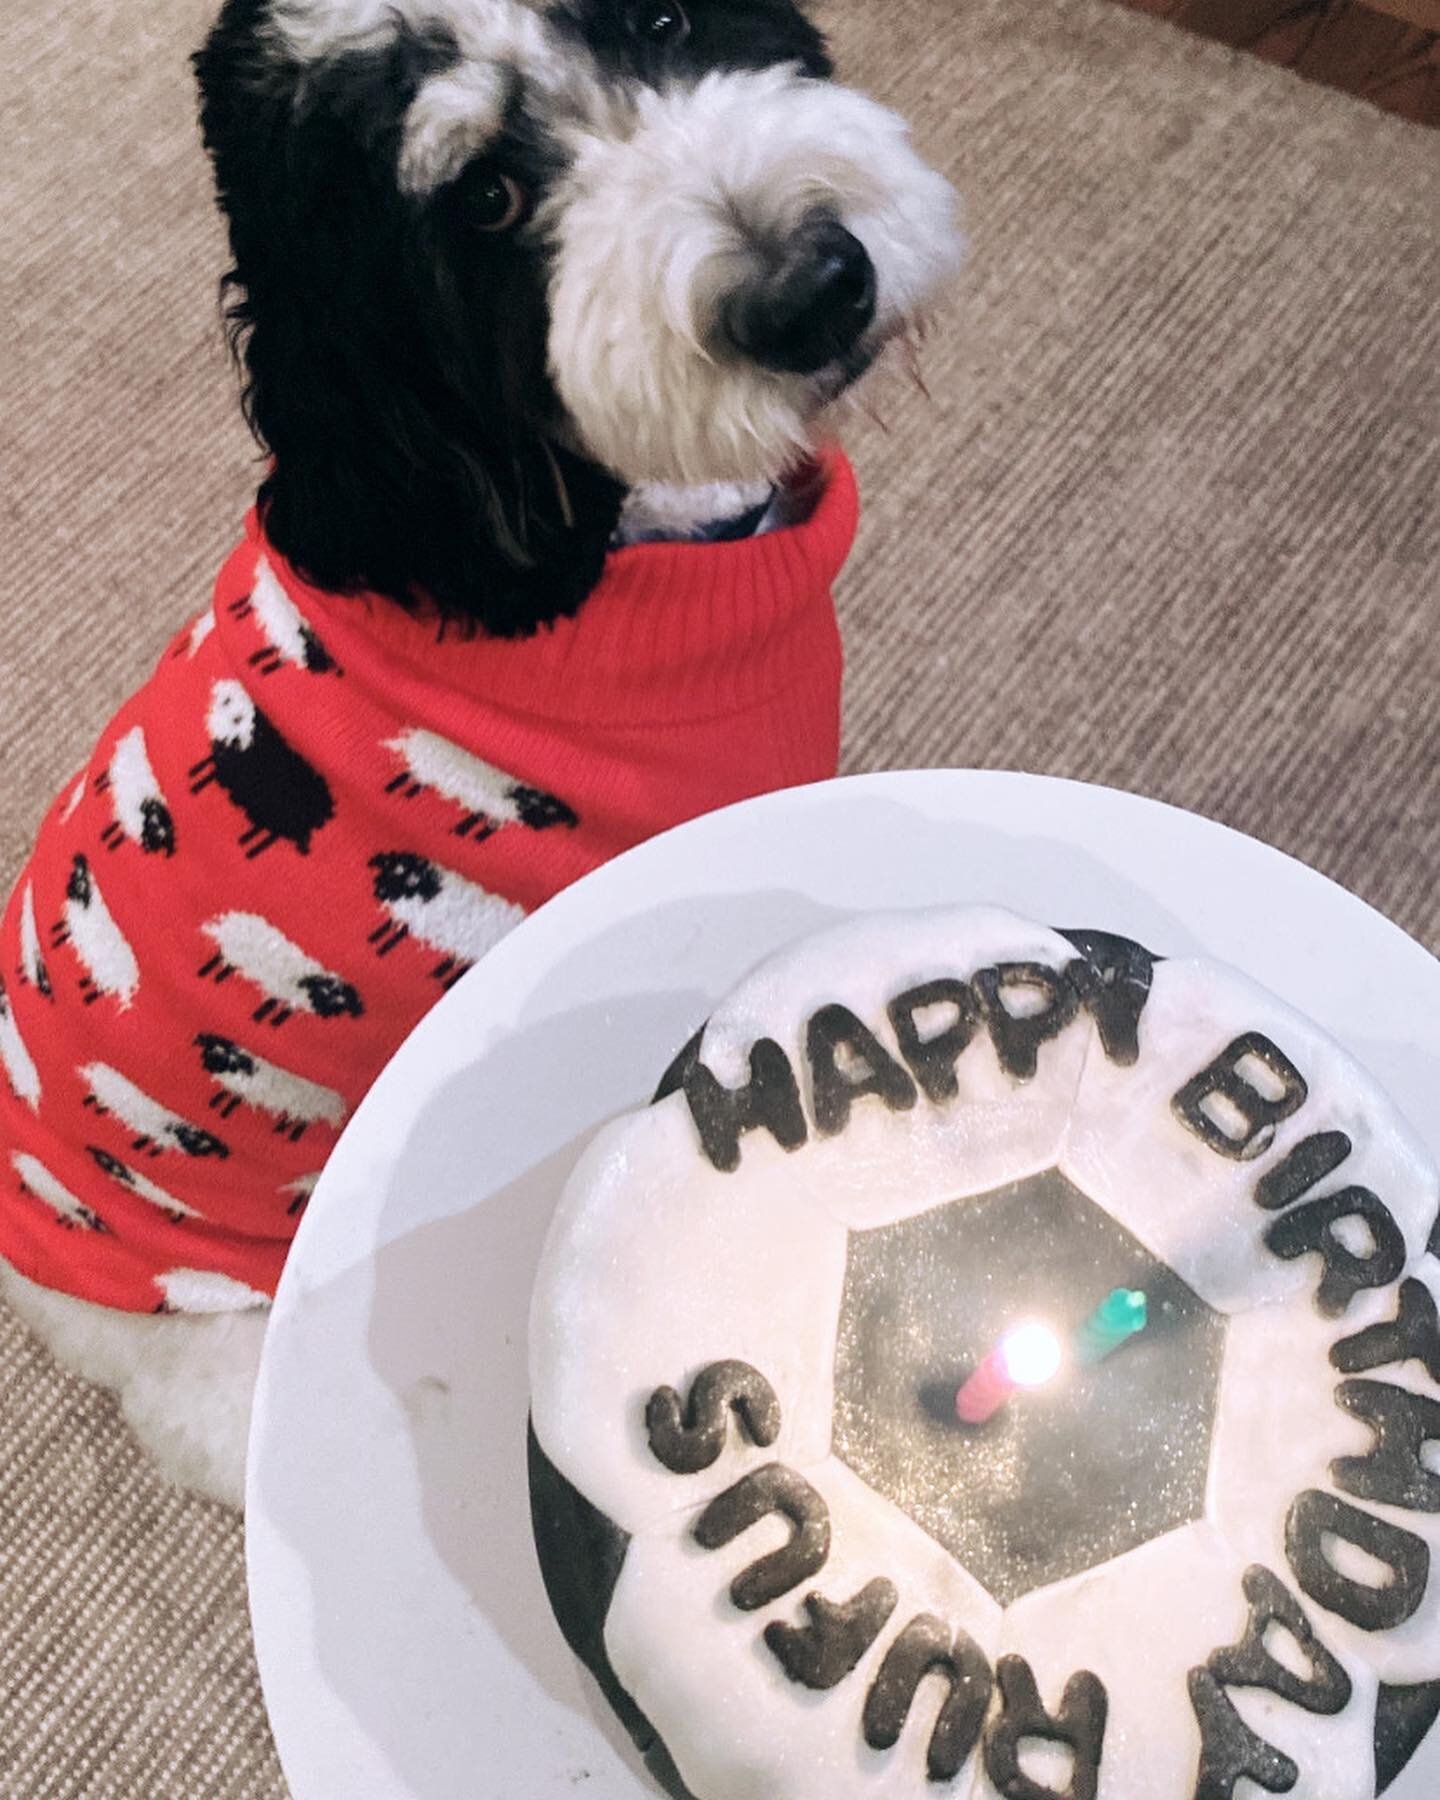 Rufus and his soccer ball cake ⚽️ 
.
He seemed to enjoy it ;) 
.
Order your celebration cake today either directly through me or on Uber Eats and DoorDash! 
.
.
.
.
#bowwowmeowpurrfessionalpetcare #bowwowbarkery #dogs #chicago #chicagodogs #Dogsofins